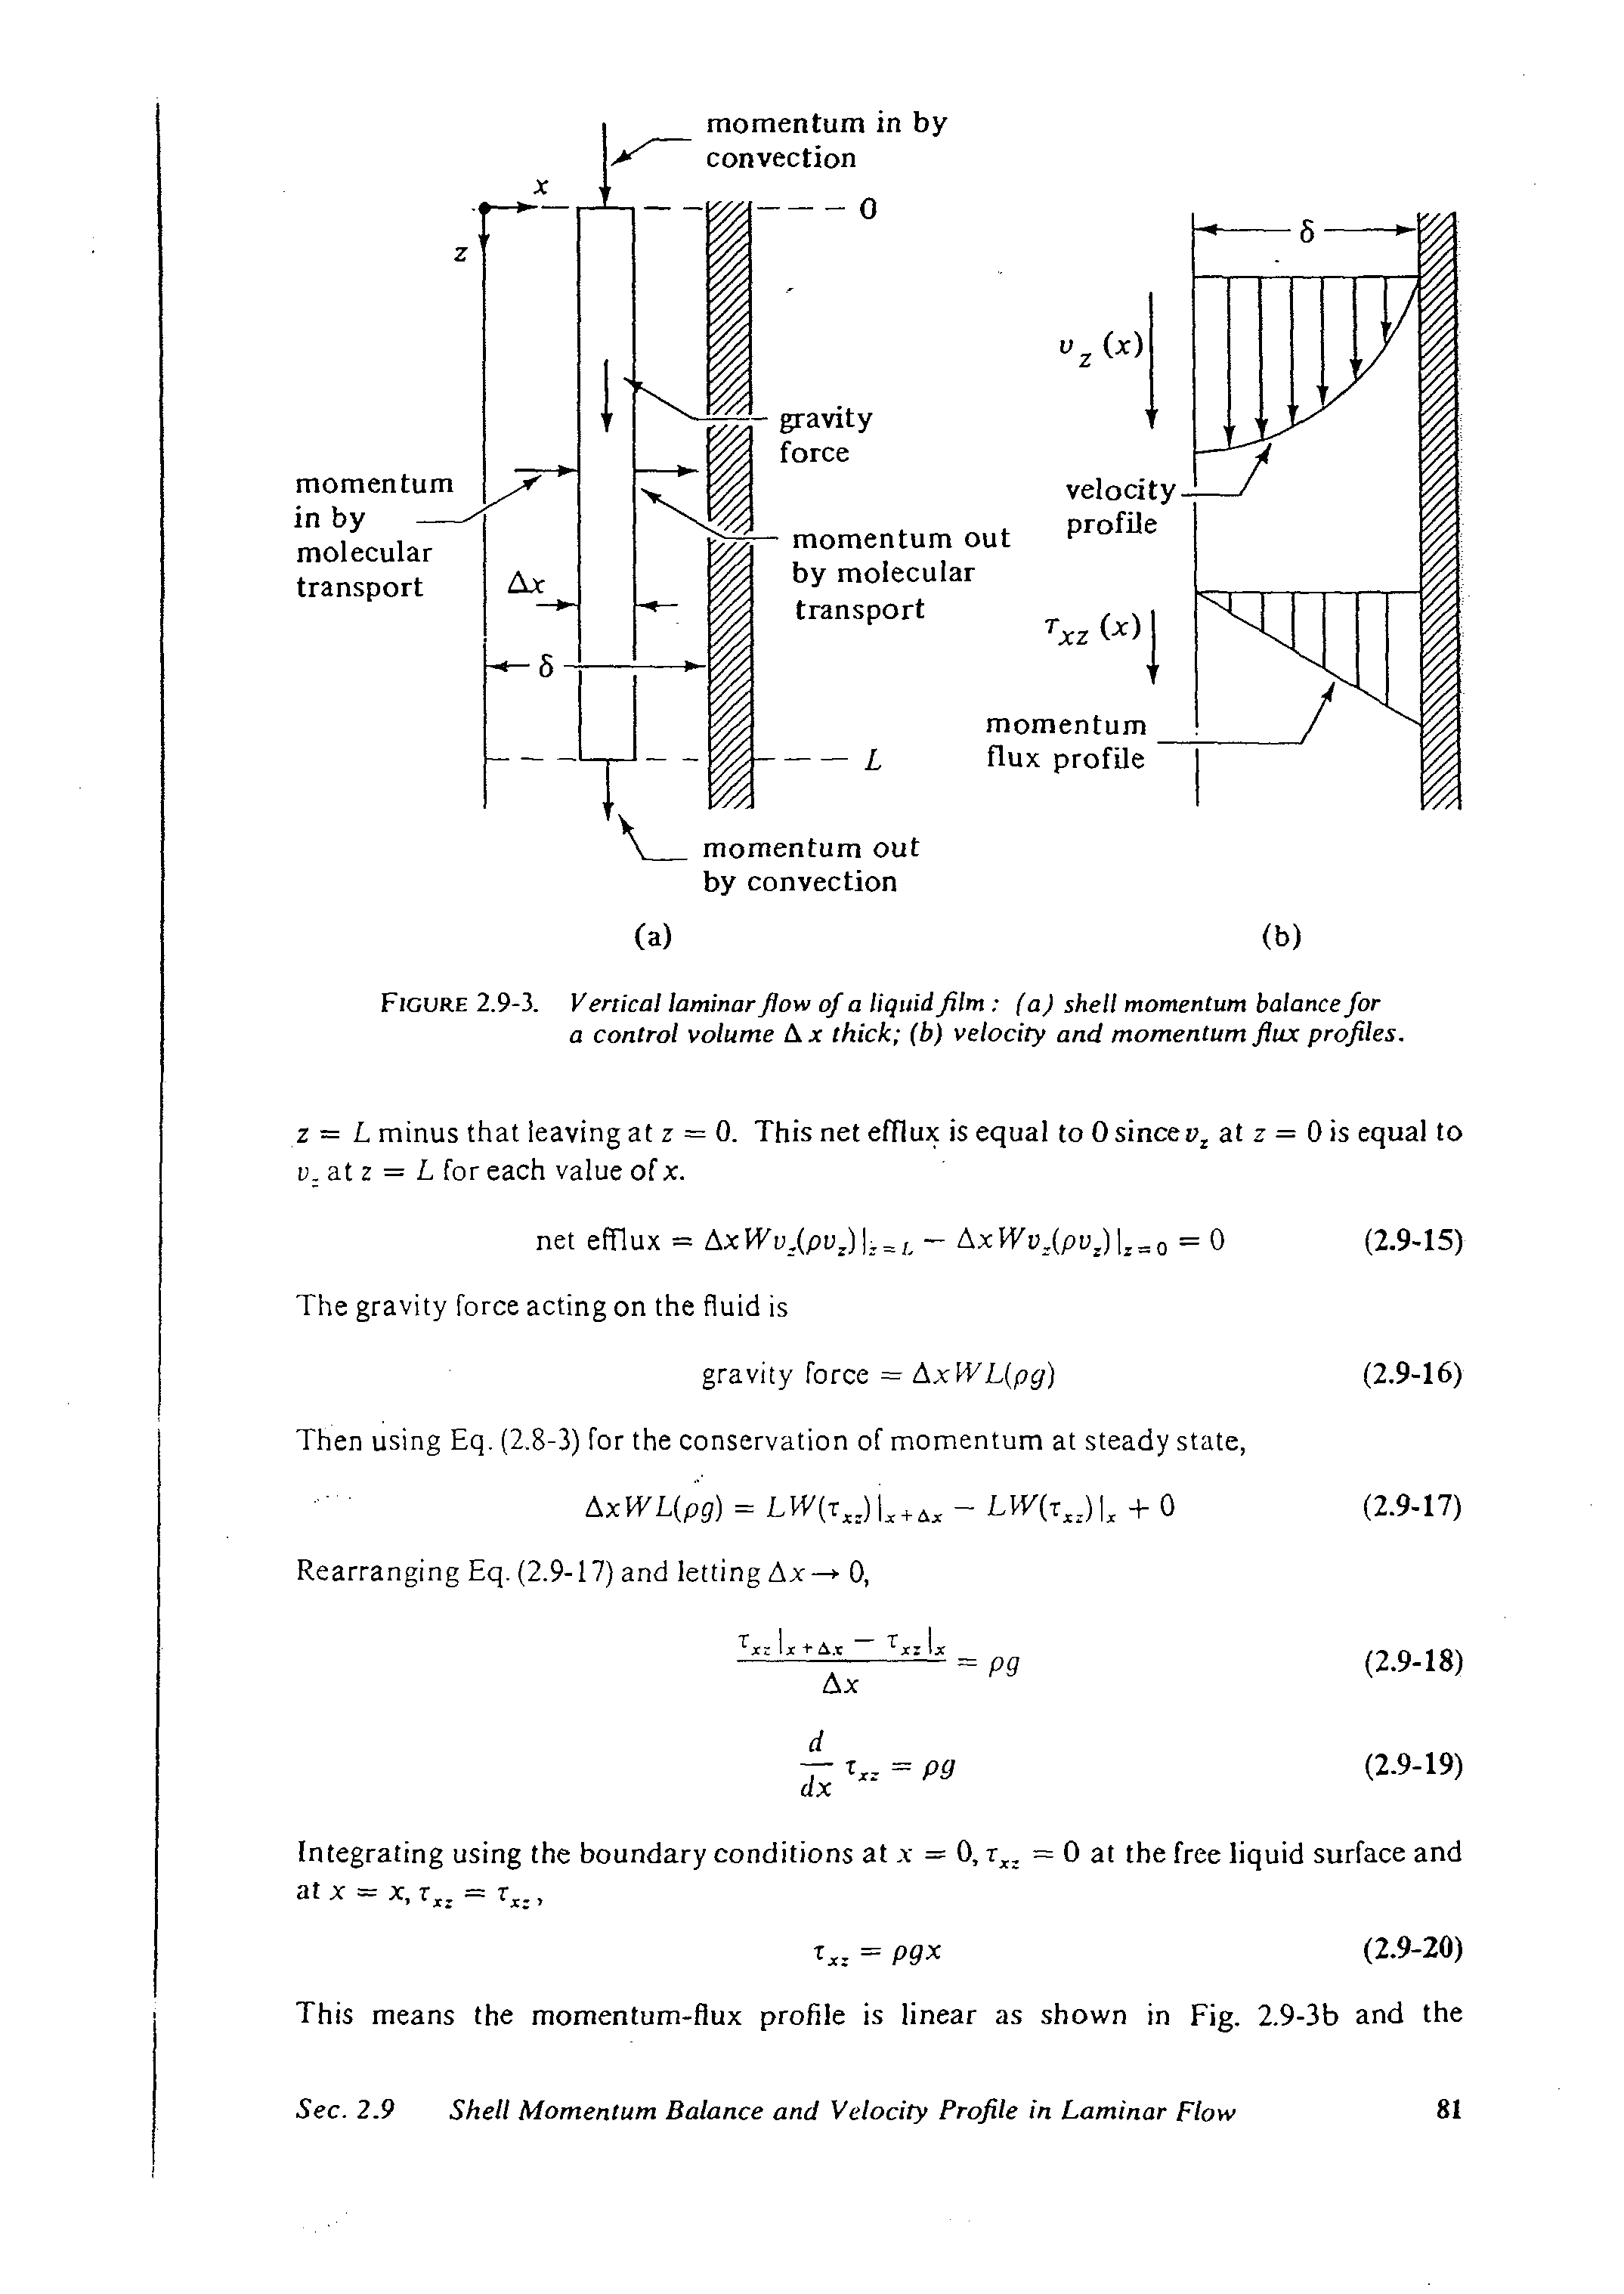 Figure 2.9-3. Vertical laminar flow of a liquid film (a) shell momentum balance for a control volume A jc thick (b) velocity and momentum flux profiles.